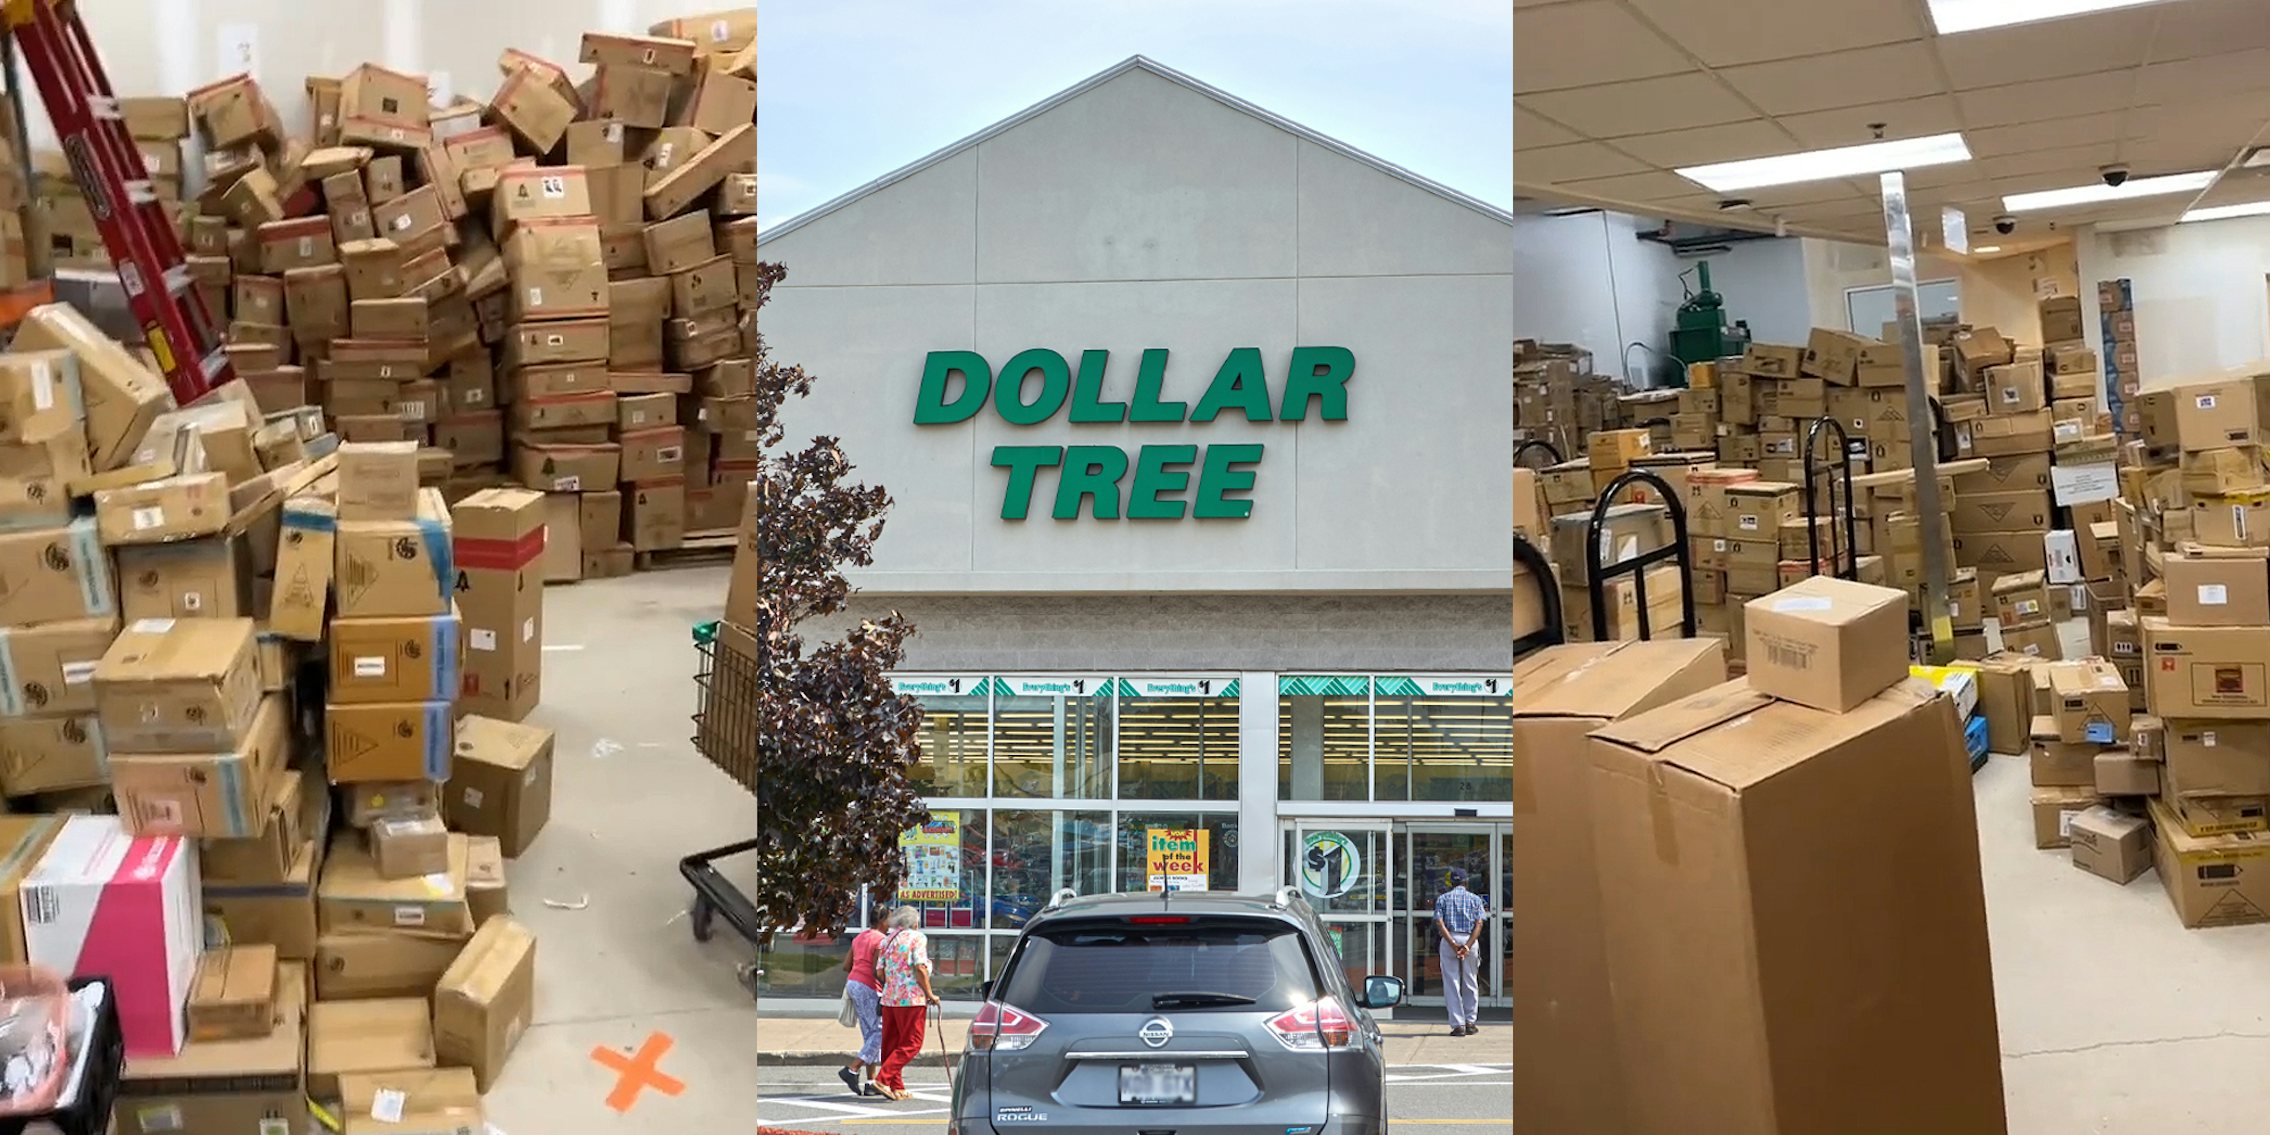 Dollar Tree interior with boxes stacked high (l) Dollar Tree building with sign (c) Dollar Tree interior with boxes everywhere (r)